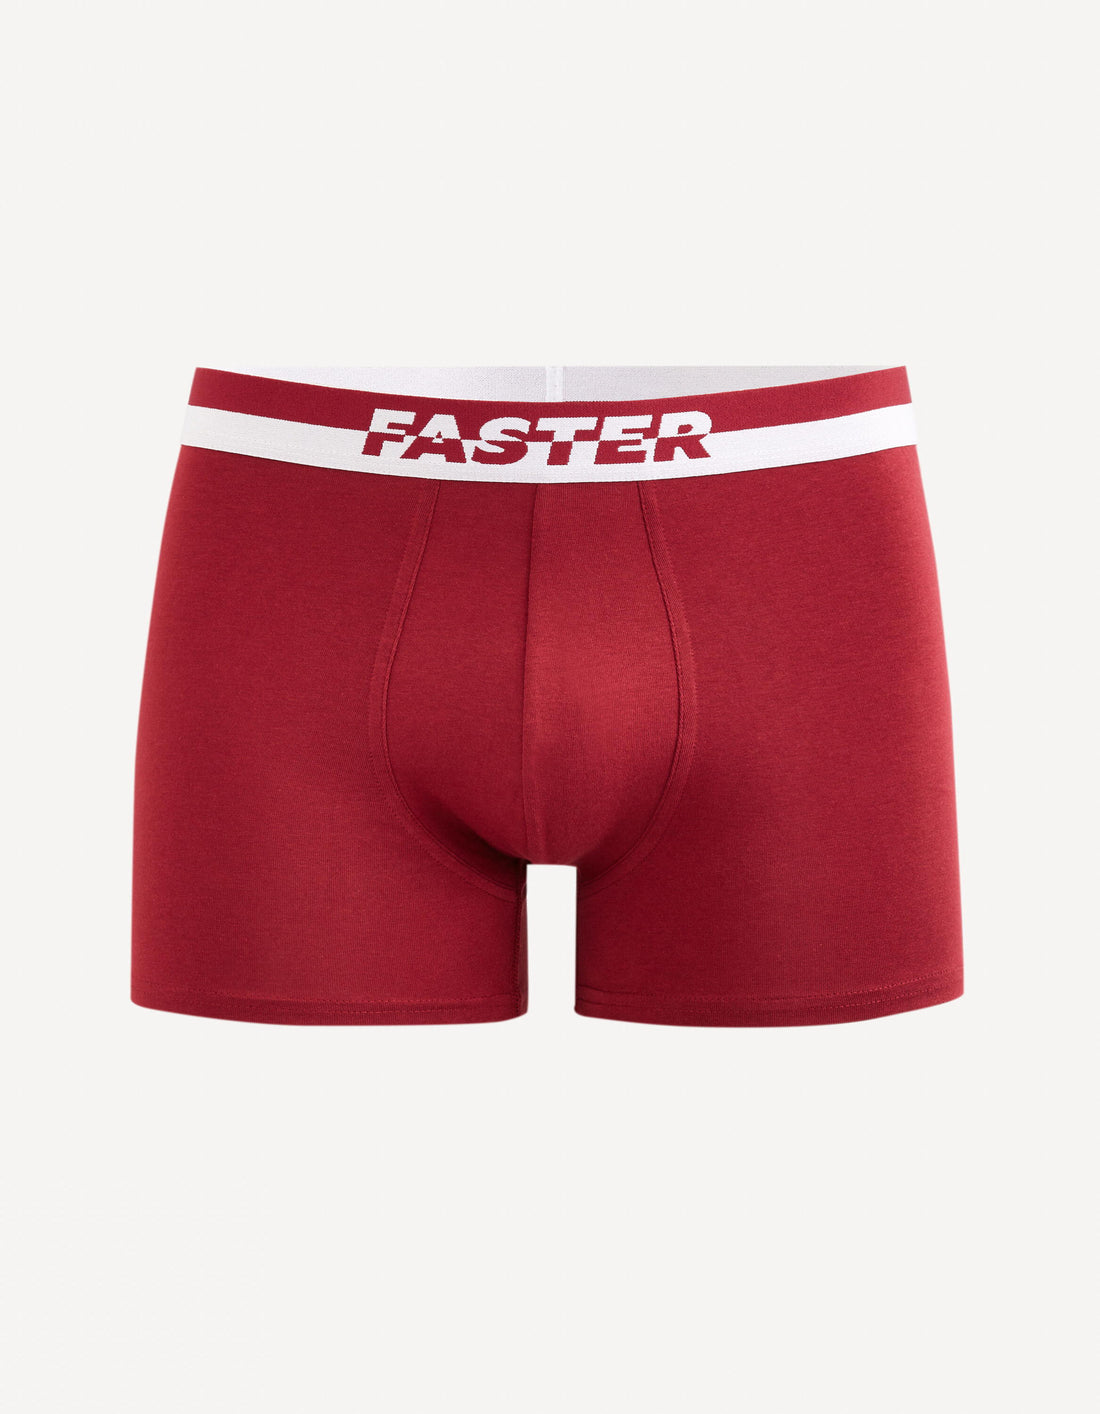 Stretch Cotton Boxer Shorts - Red_GIBOFASTER_RUST RED_01